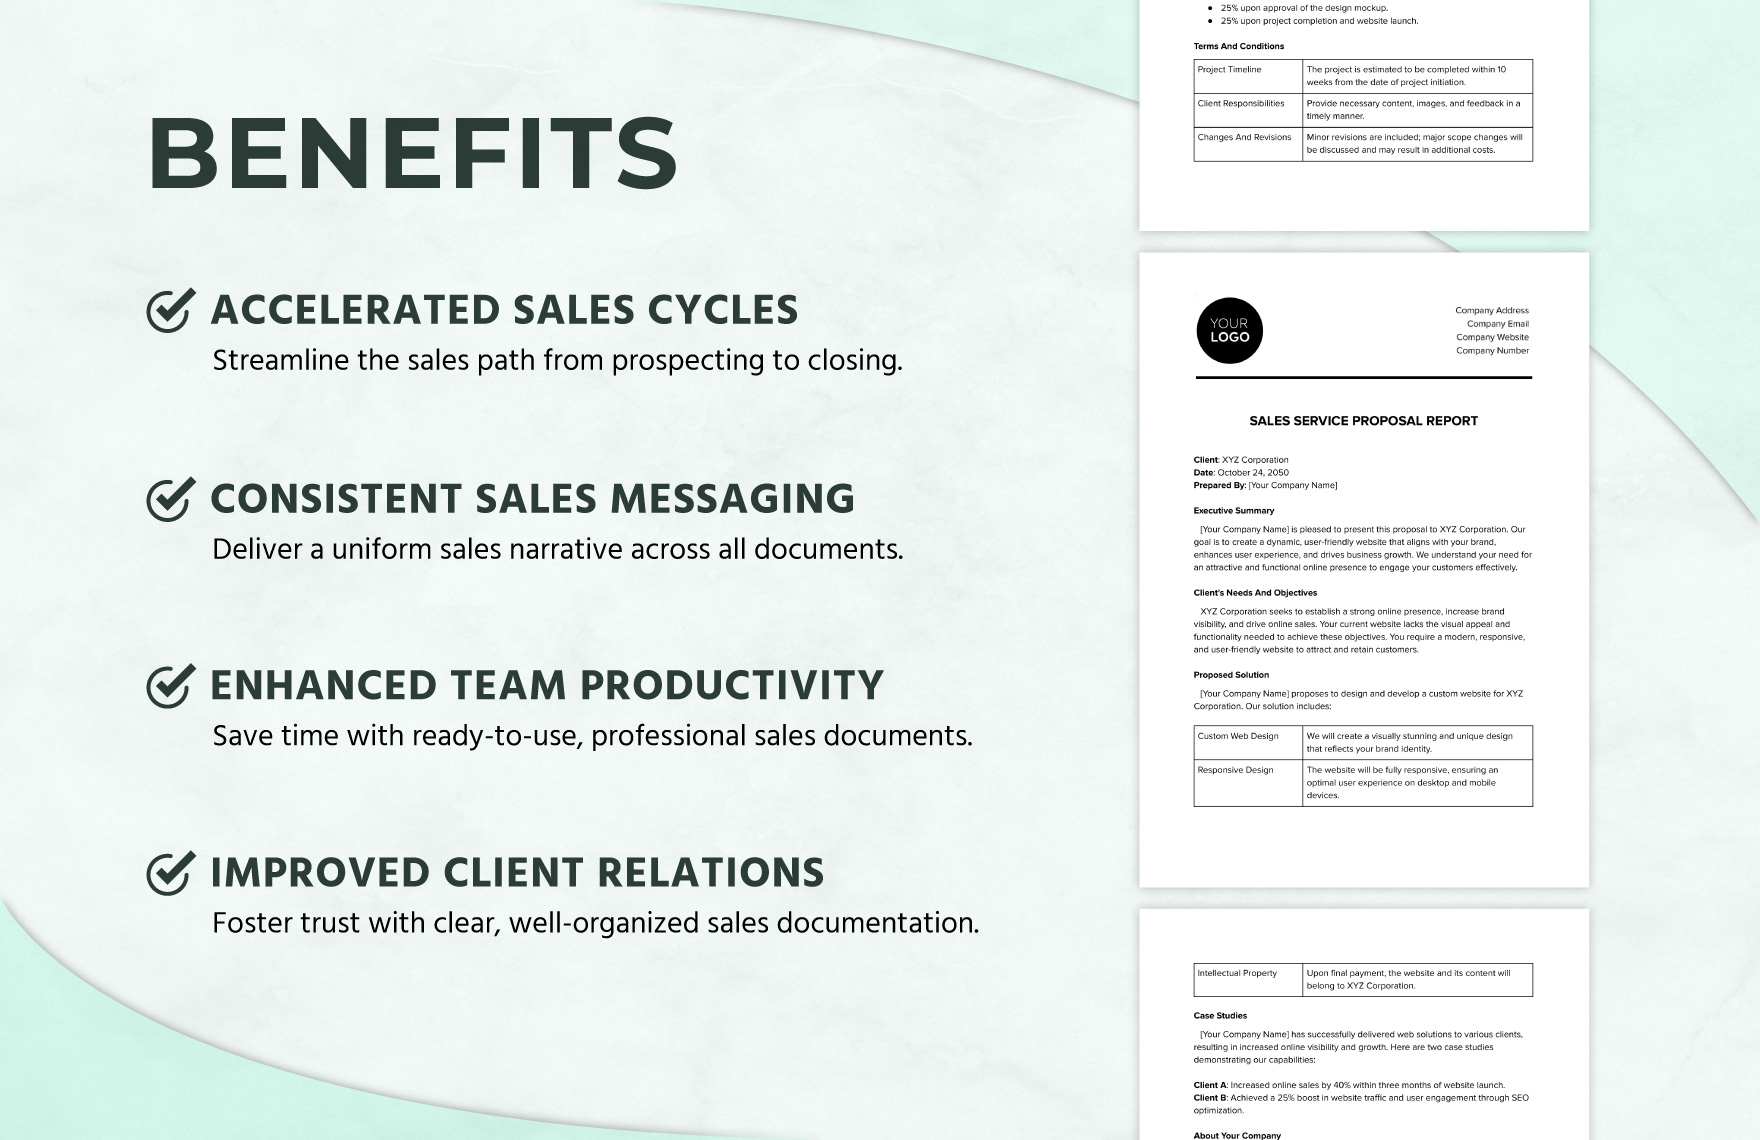 Sales Service Proposal Report Template